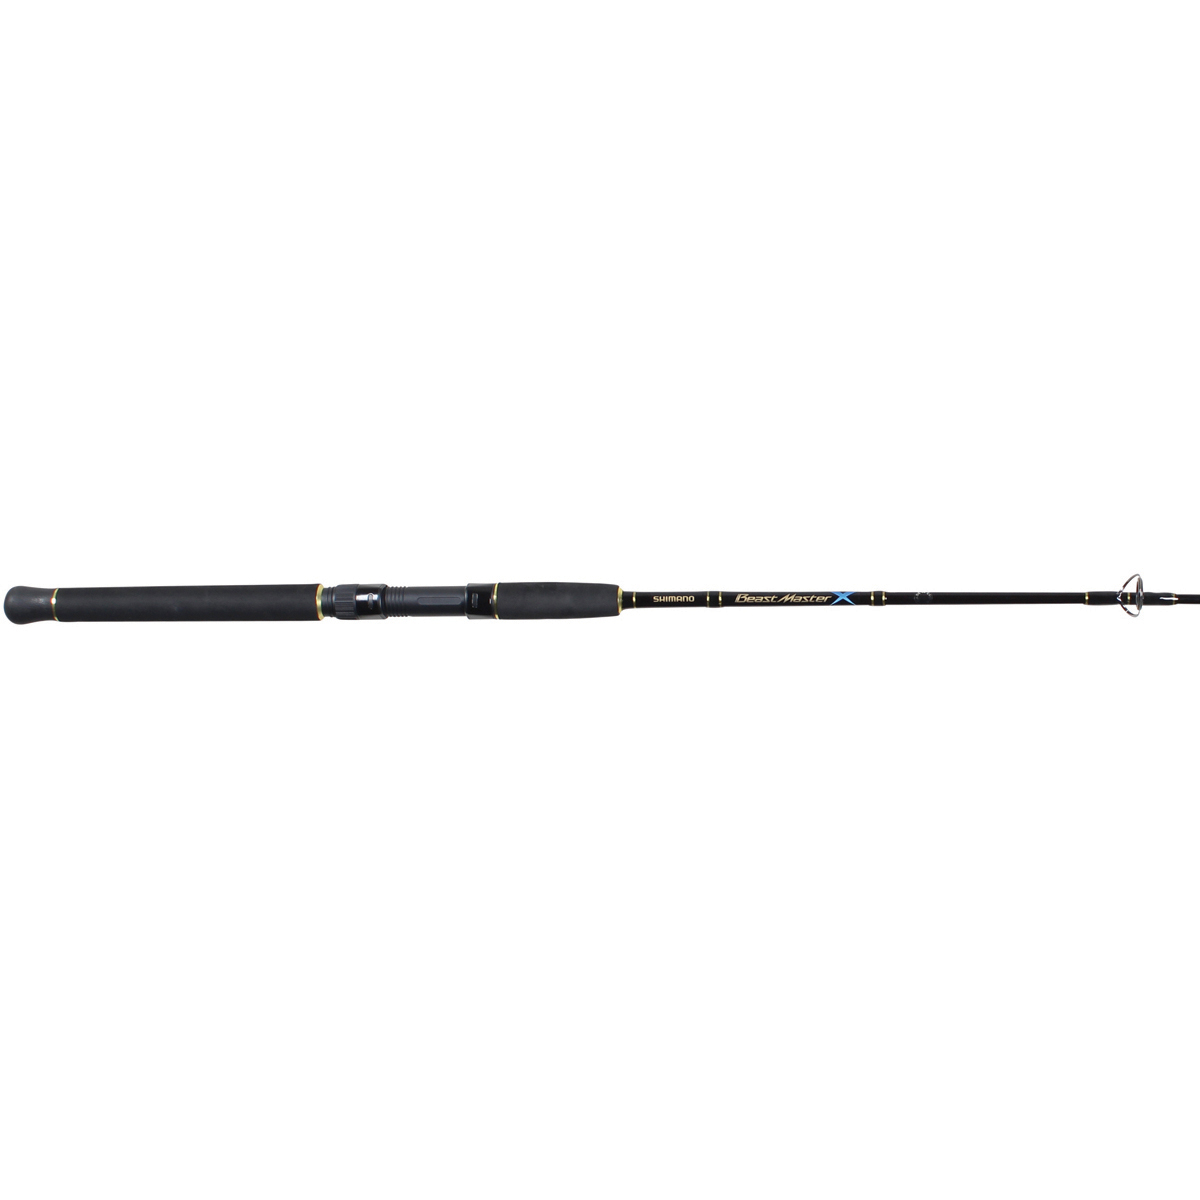 Shimano Beastmaster Spinning Rod 9ft 4-8kg (4 Piece) @ Club BCF